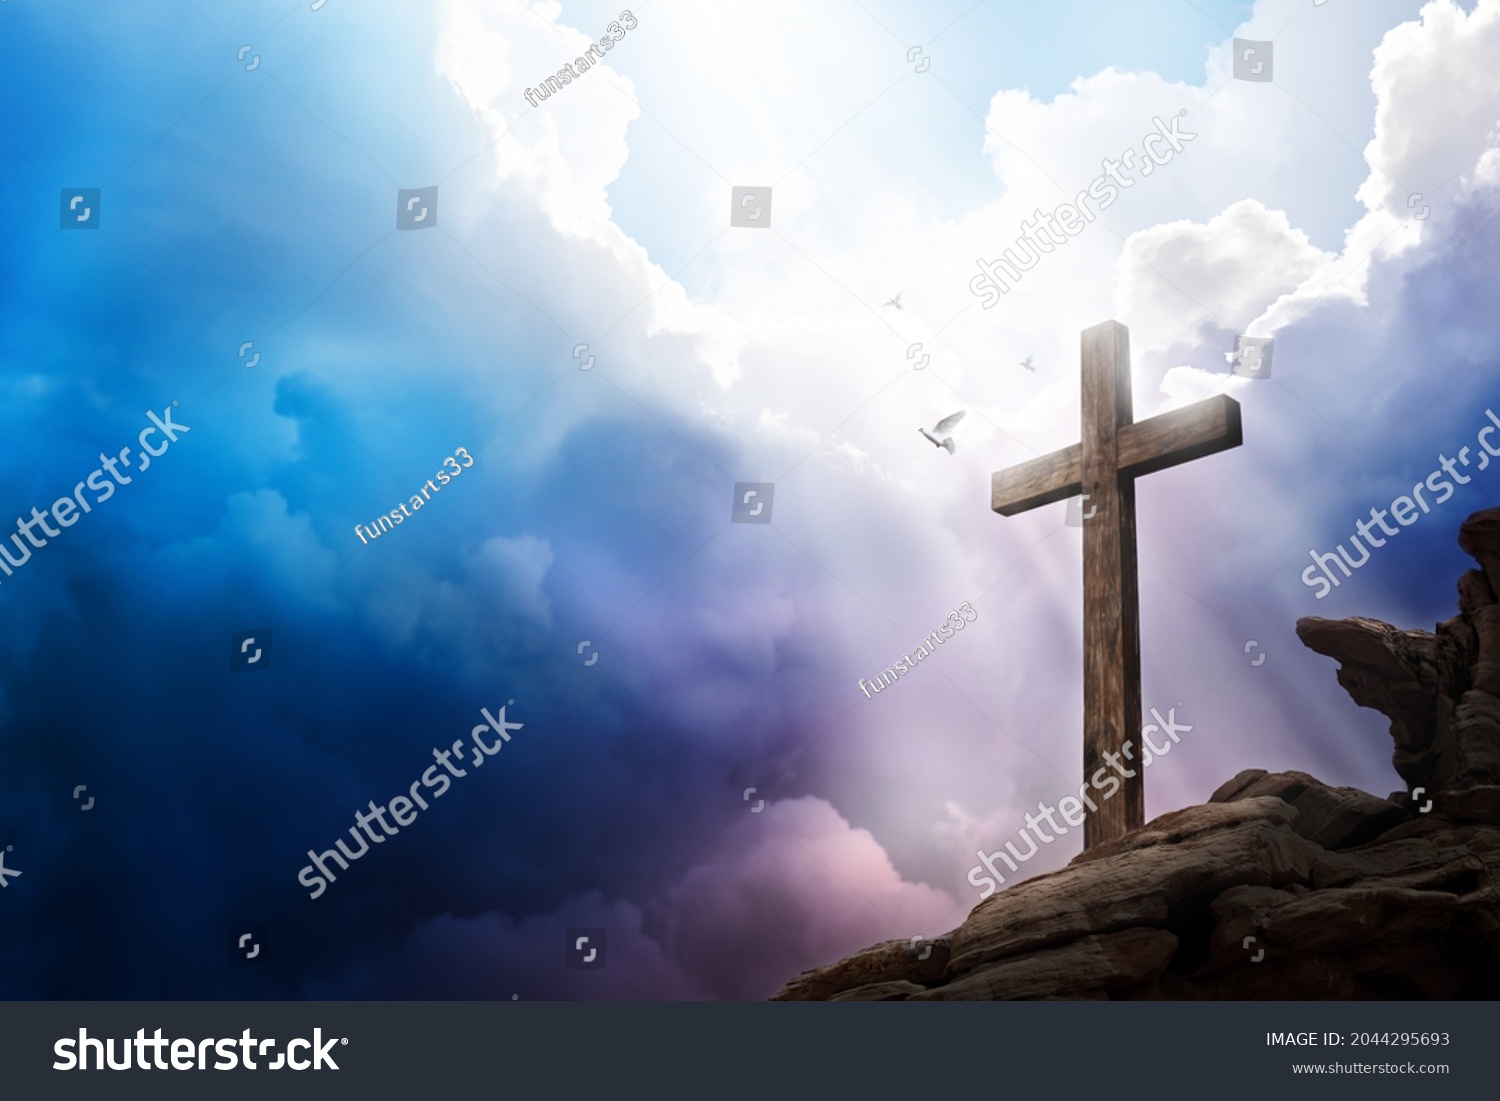 Sky opening up with light rays shining on a cross with doves flying. Religious theme concept. #2044295693